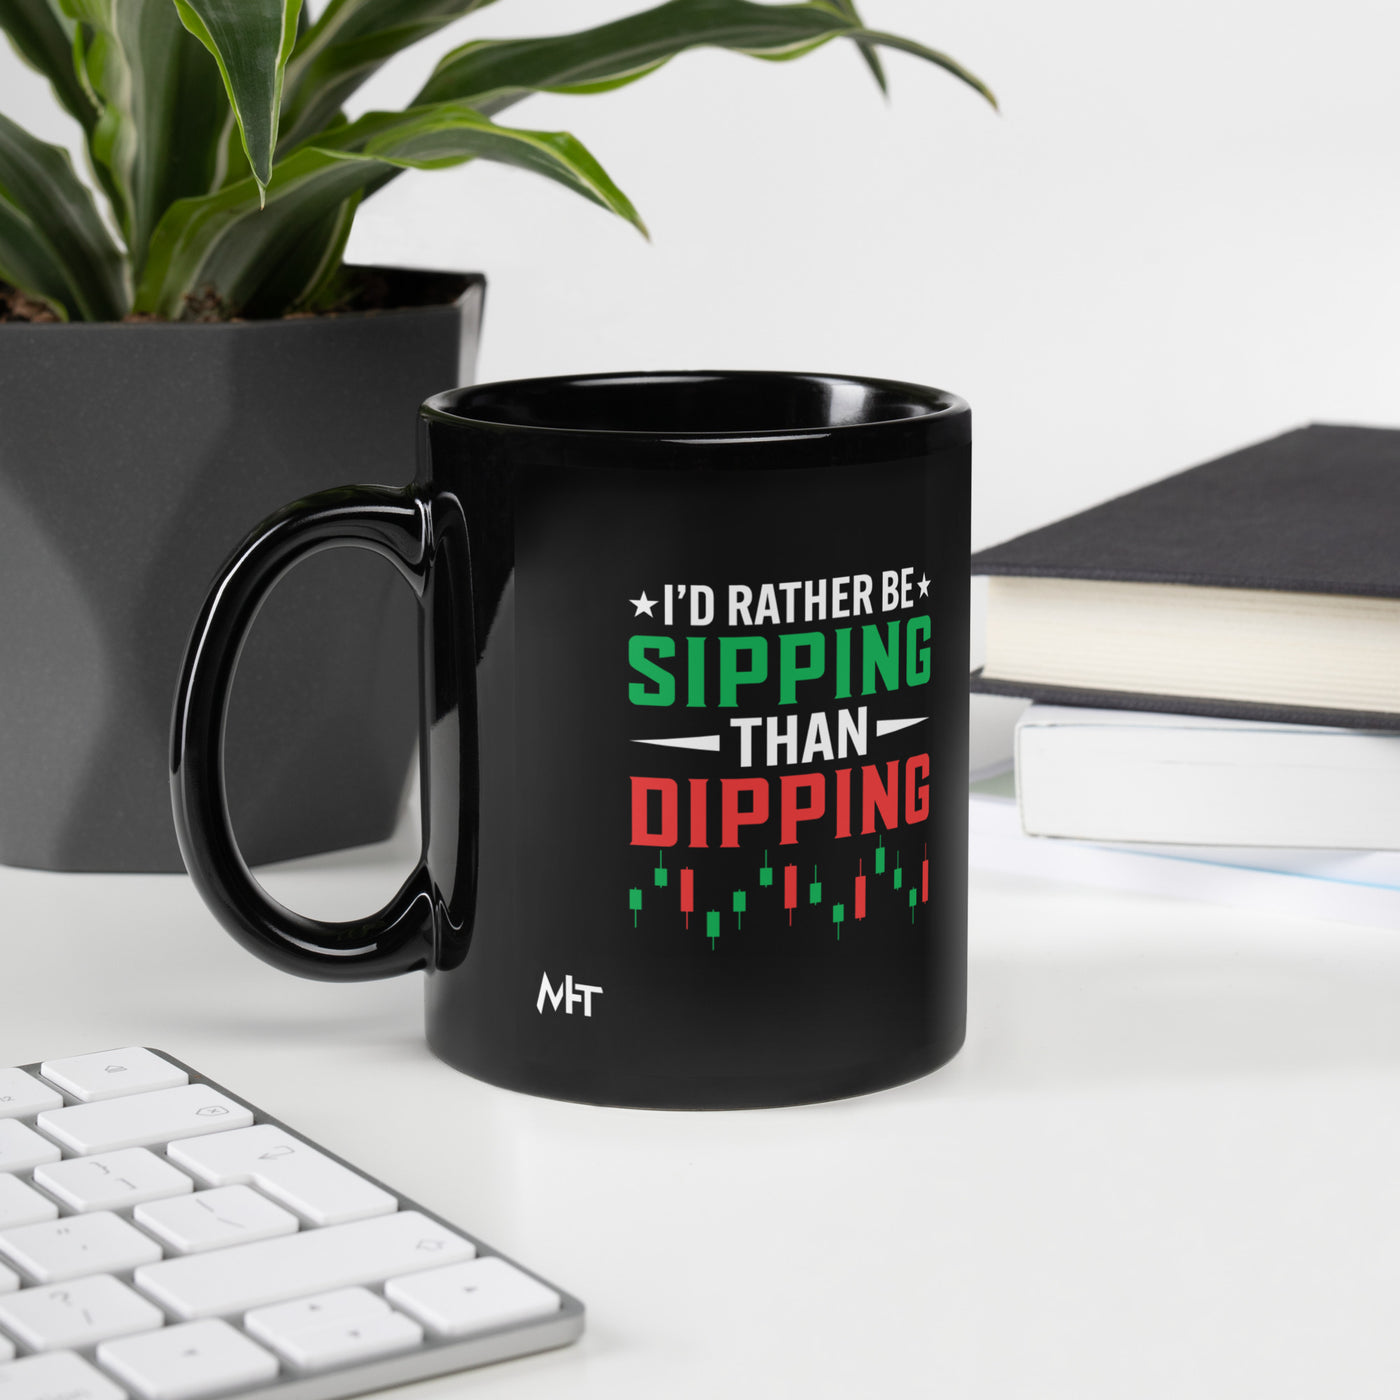 I'd rather be Sipping than Dipping - Black Glossy Mug